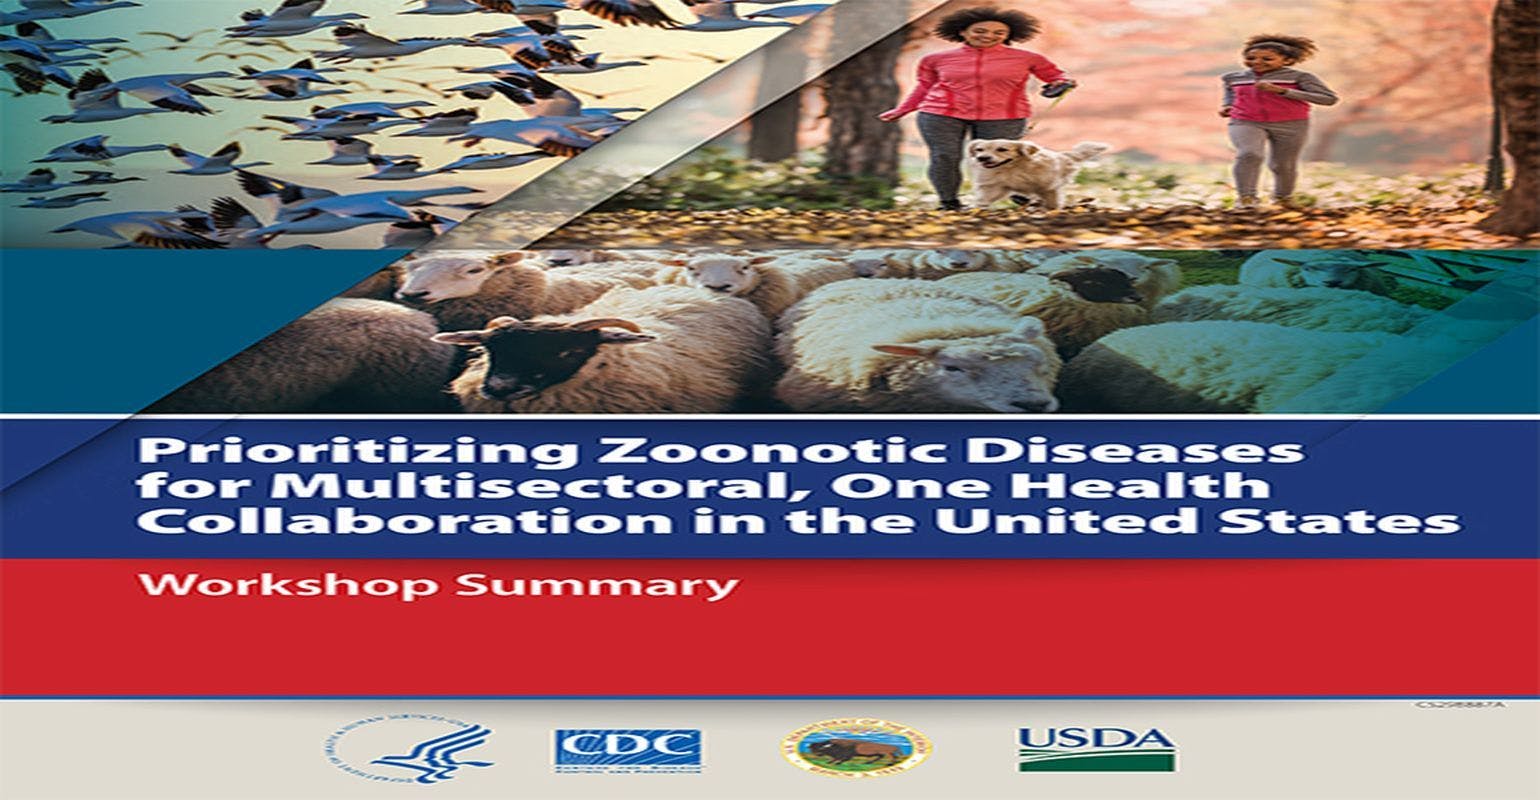 8 Zoonotic Diseases Shared Between Animals and People of Most Concern in the U.S.